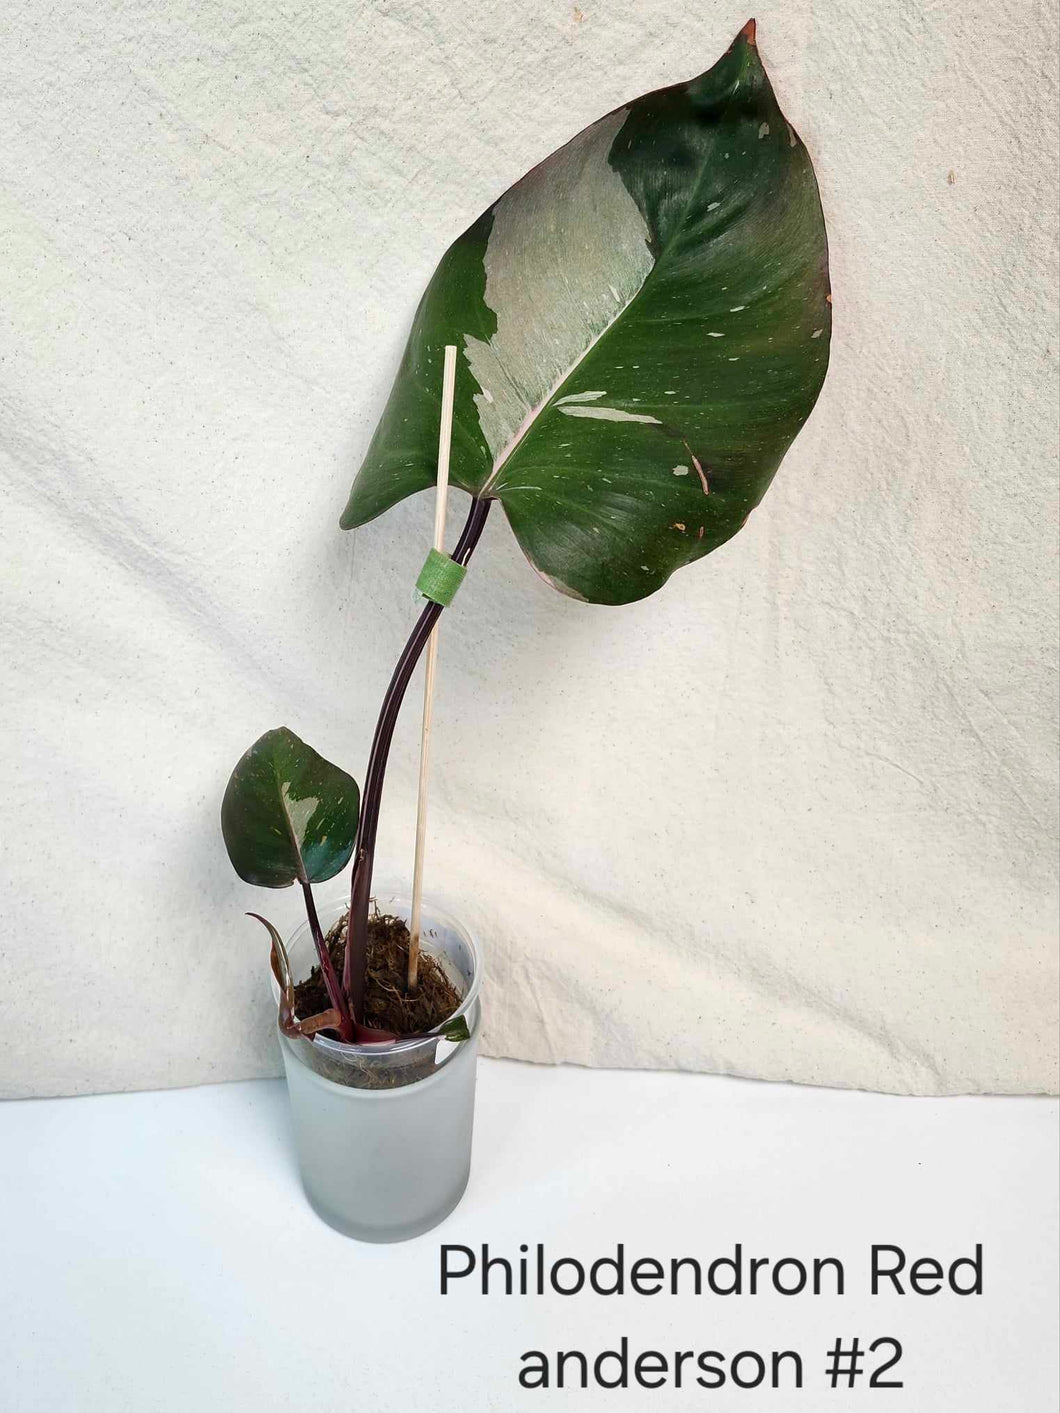 Philodendron red anderson #2